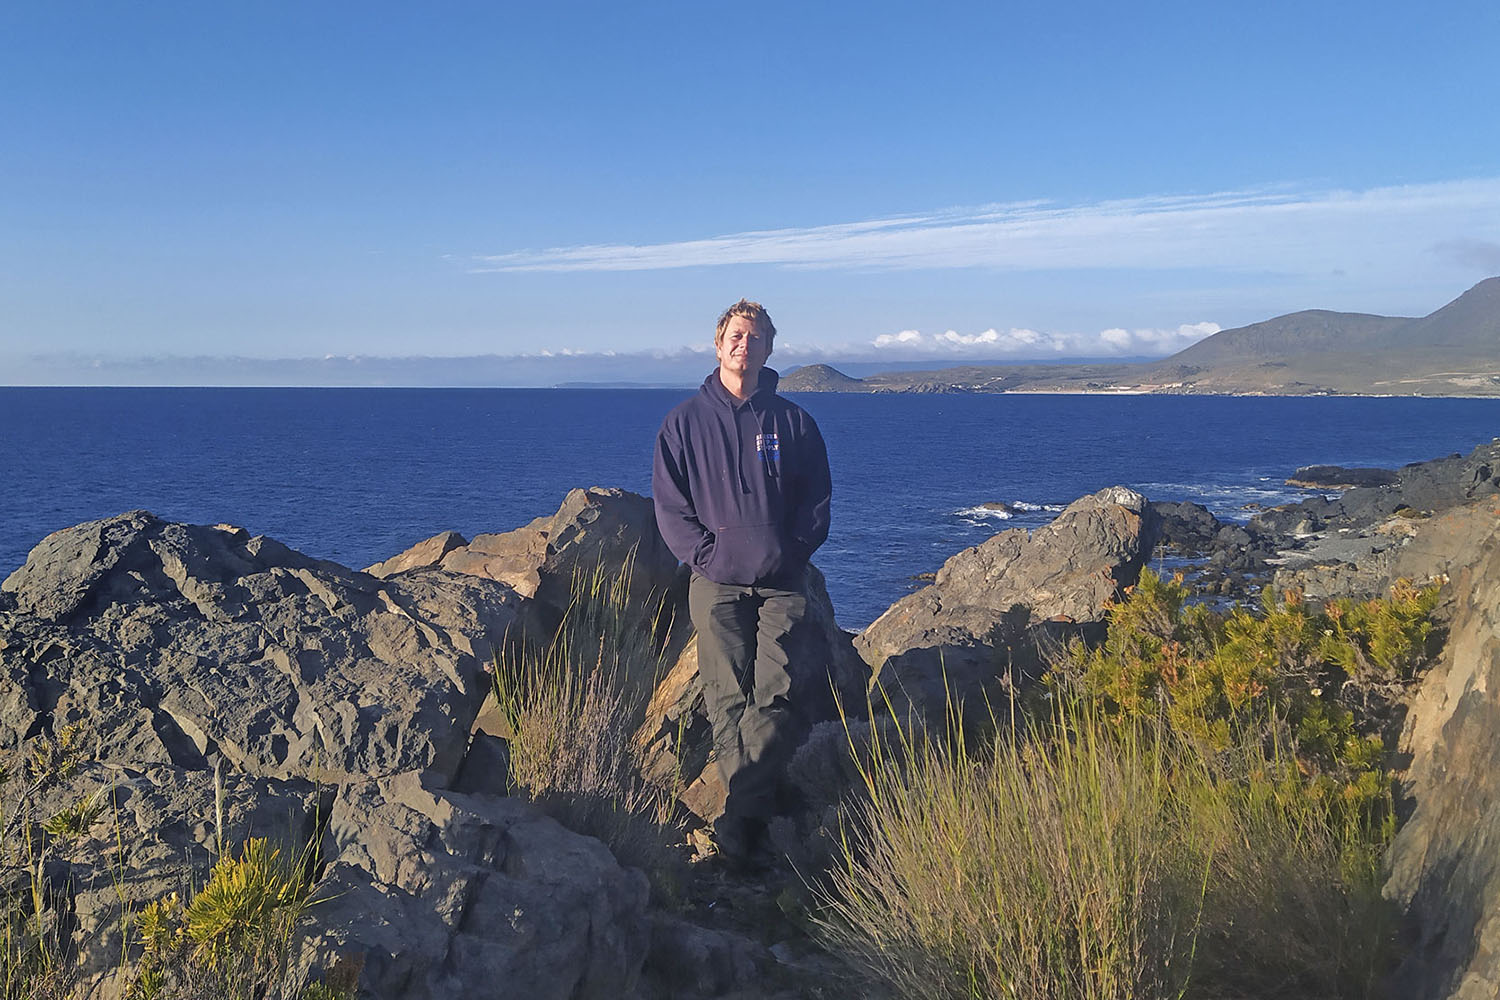 The wild Pacific coast of Chile is the backdrop for Baumann’s sabbatical research project. Coastal water temperature changes here with latitude, and fish have adapted to this temperature gradient. The adaptations may give insight into how the fish will fare with climate change.